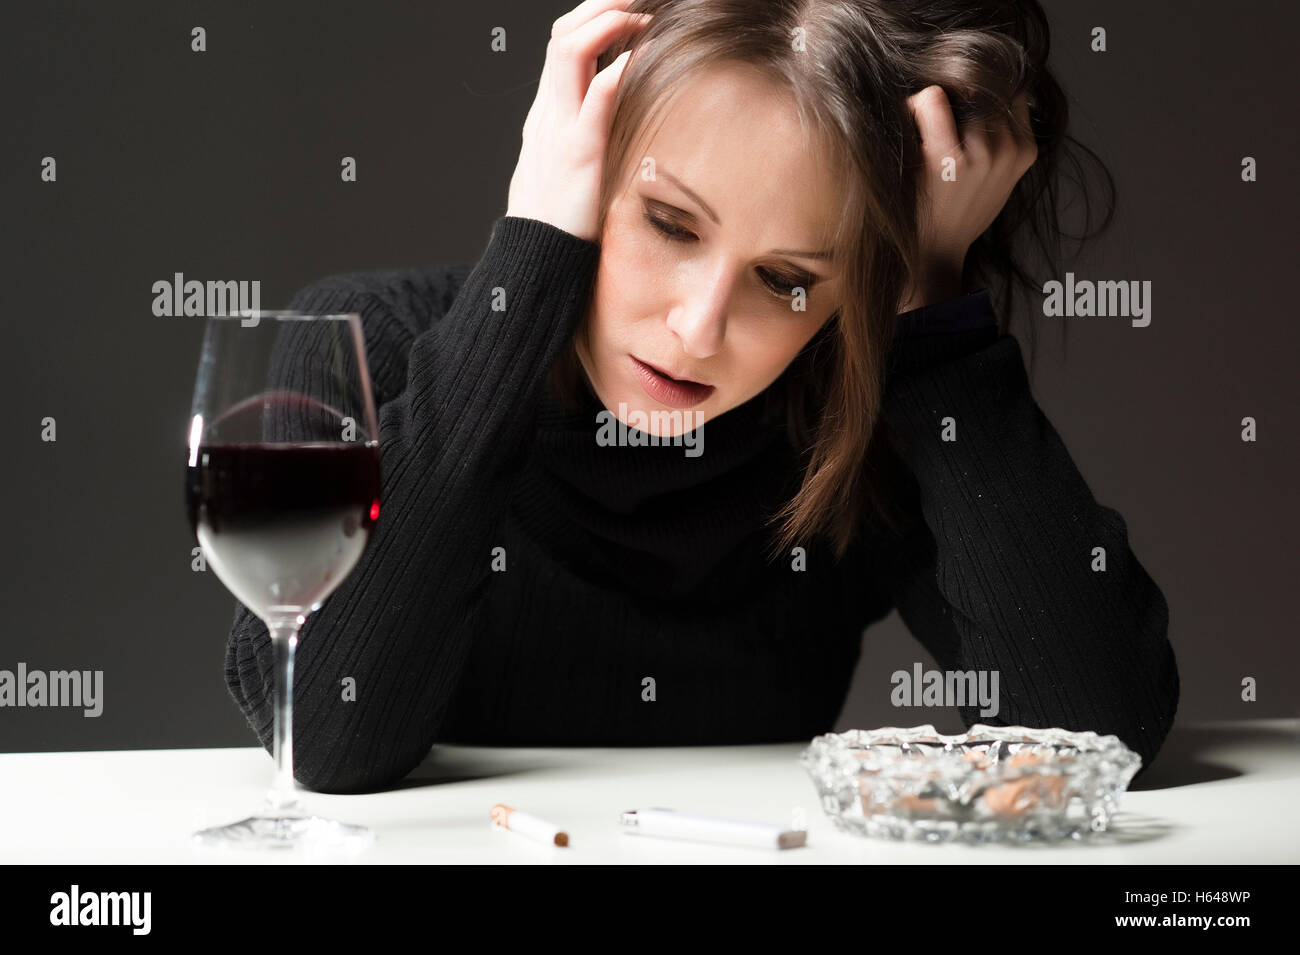 Drunk woman with wine Stock Photo